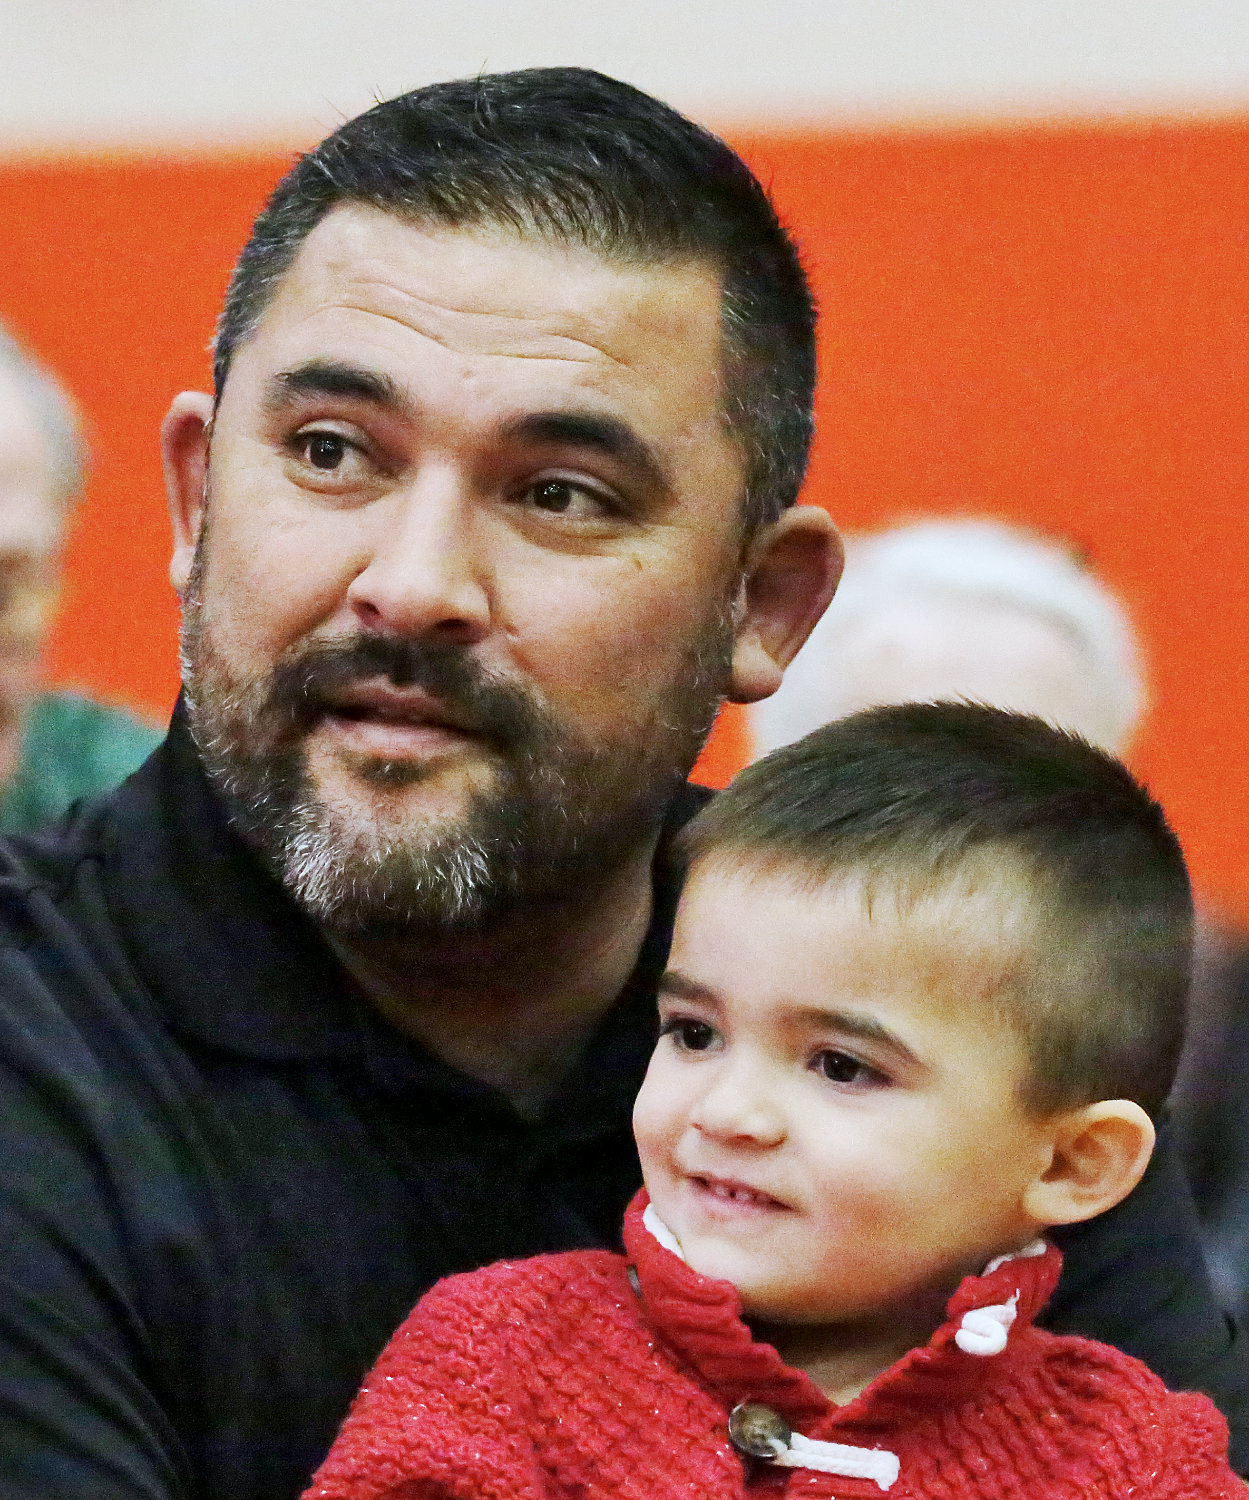 Former active duty Marine Kris Quintana and his son, River, enjoyed the Veterans Day program in the Mineola School gymnasium.